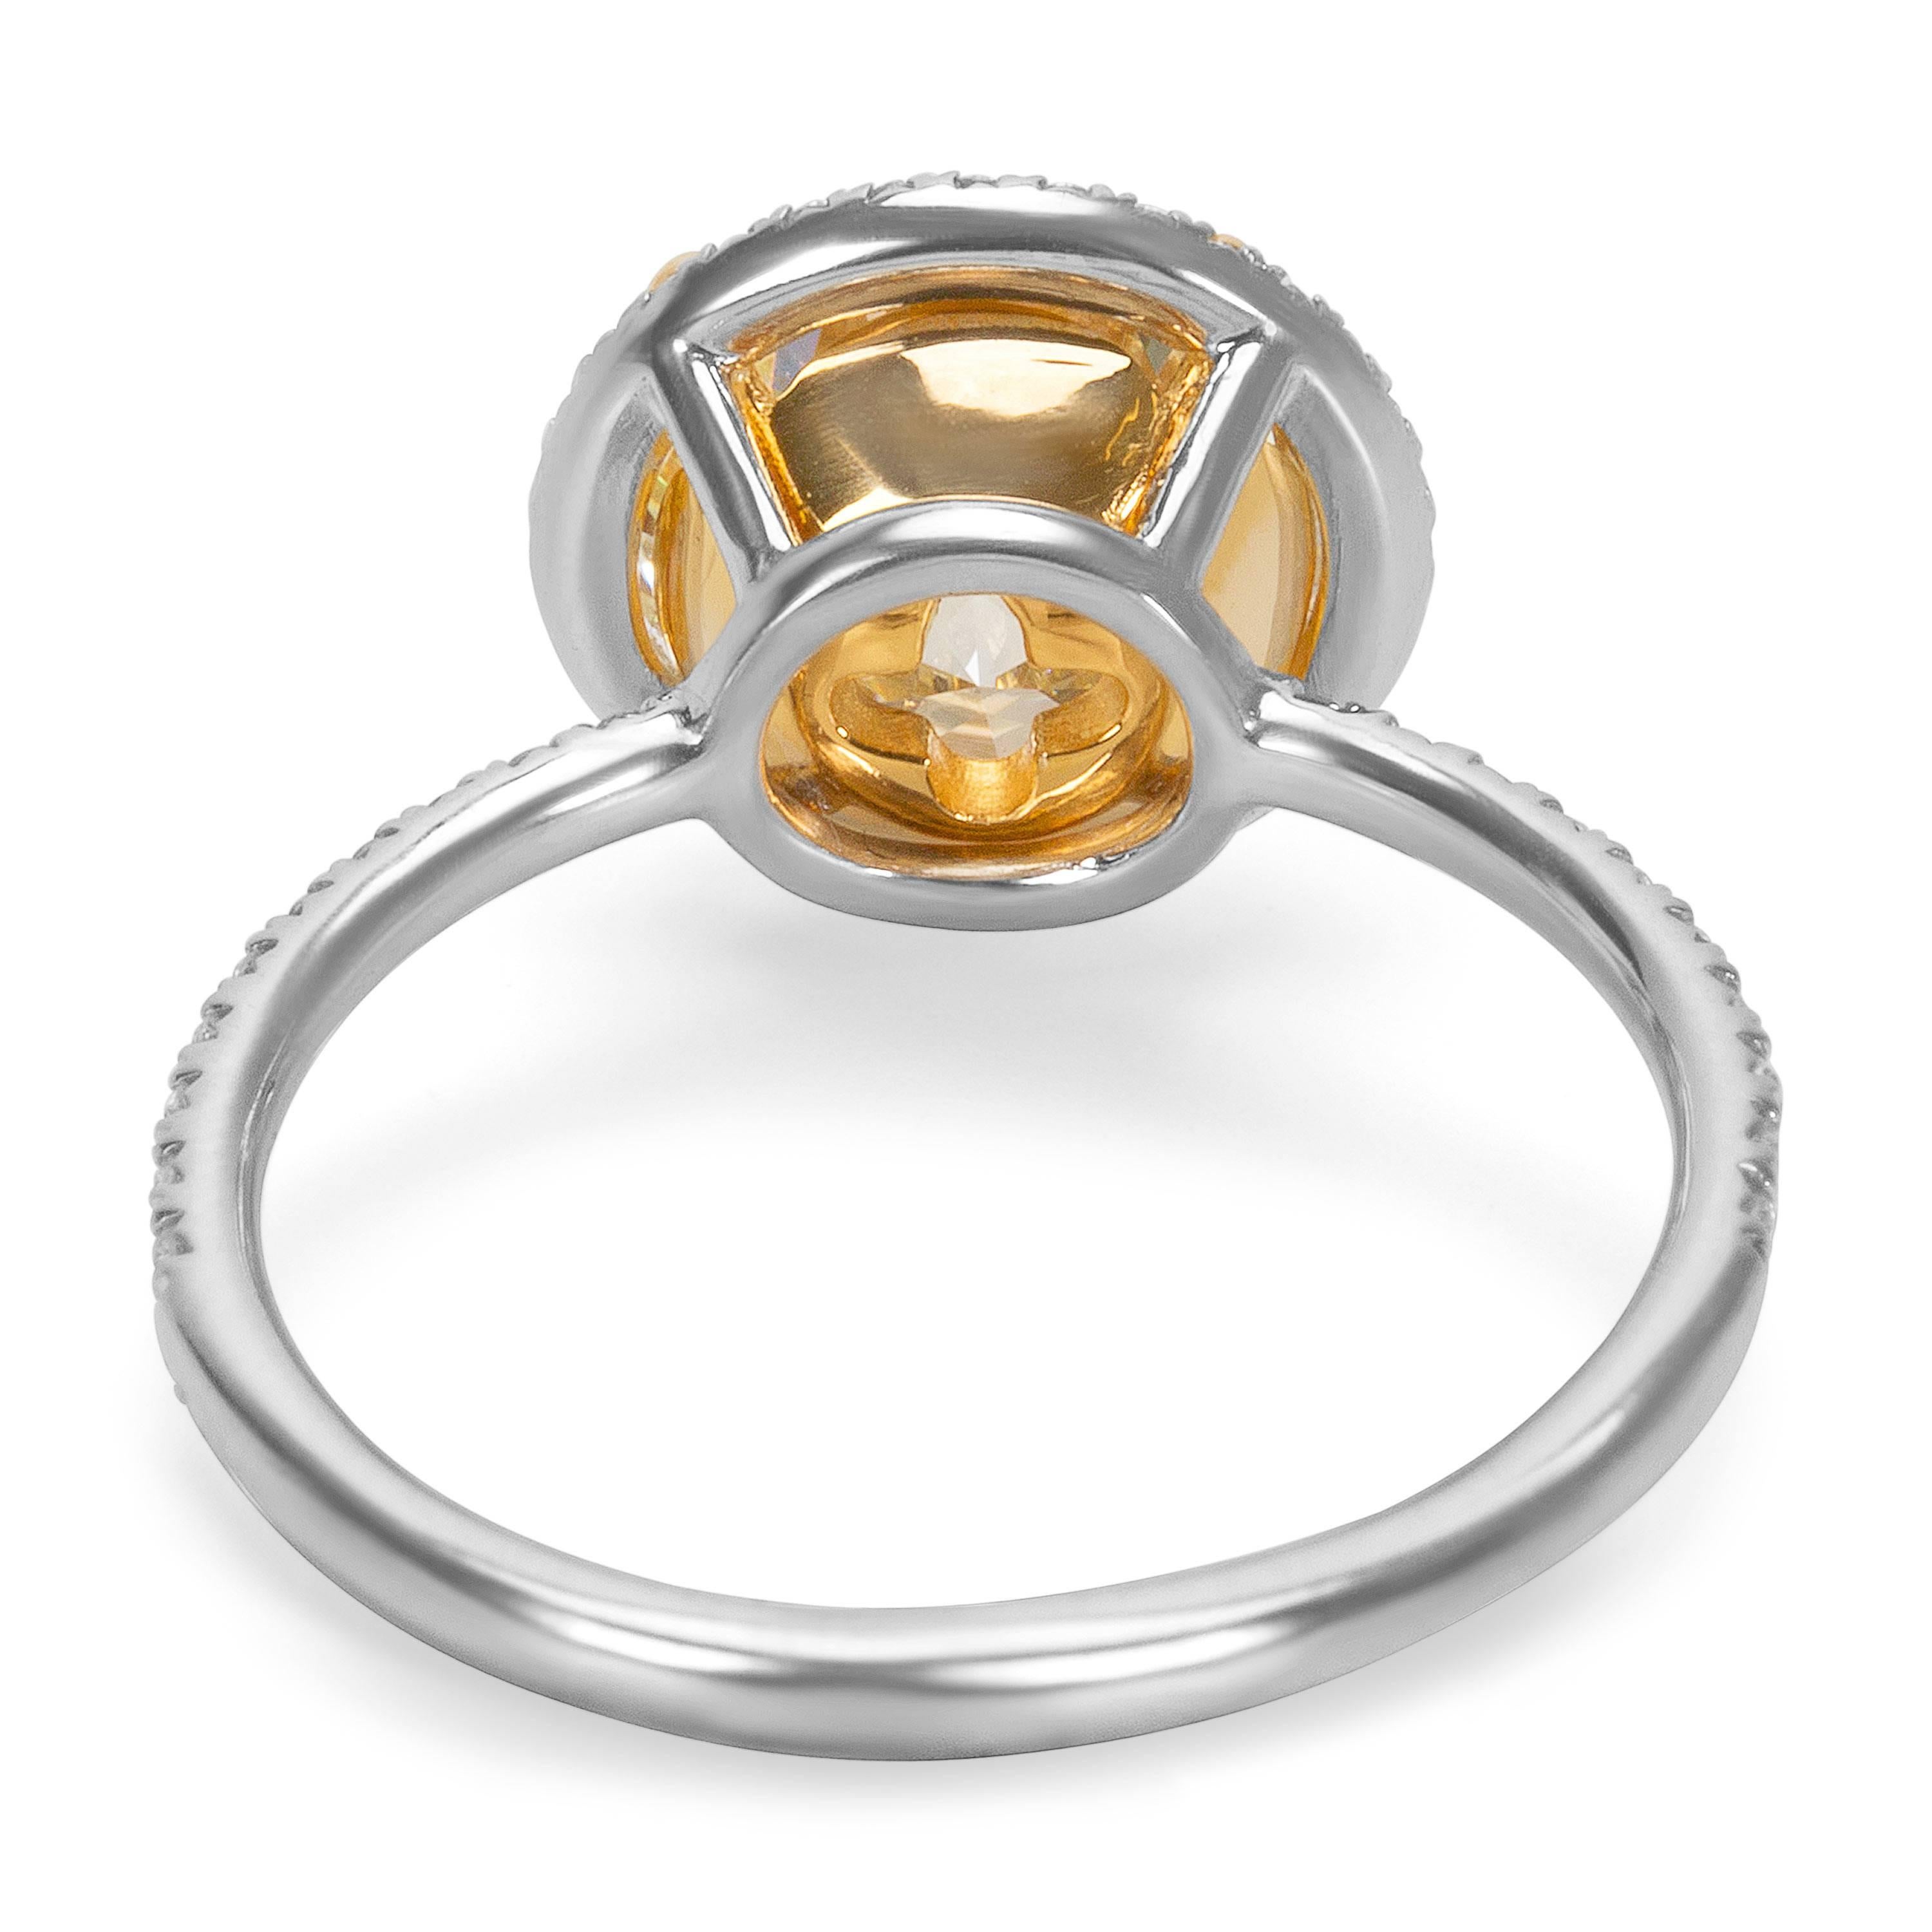 This GIA Certified 3.25 Round Cut Diamond is Q-R in color and VVS1 in clarity. It is set in an 18K yellow gold basket setting. The diamond halo and platinum band features 0.25 carats of round cut diamonds, G-H in color and SI2-I1 in clarity. 

Ring